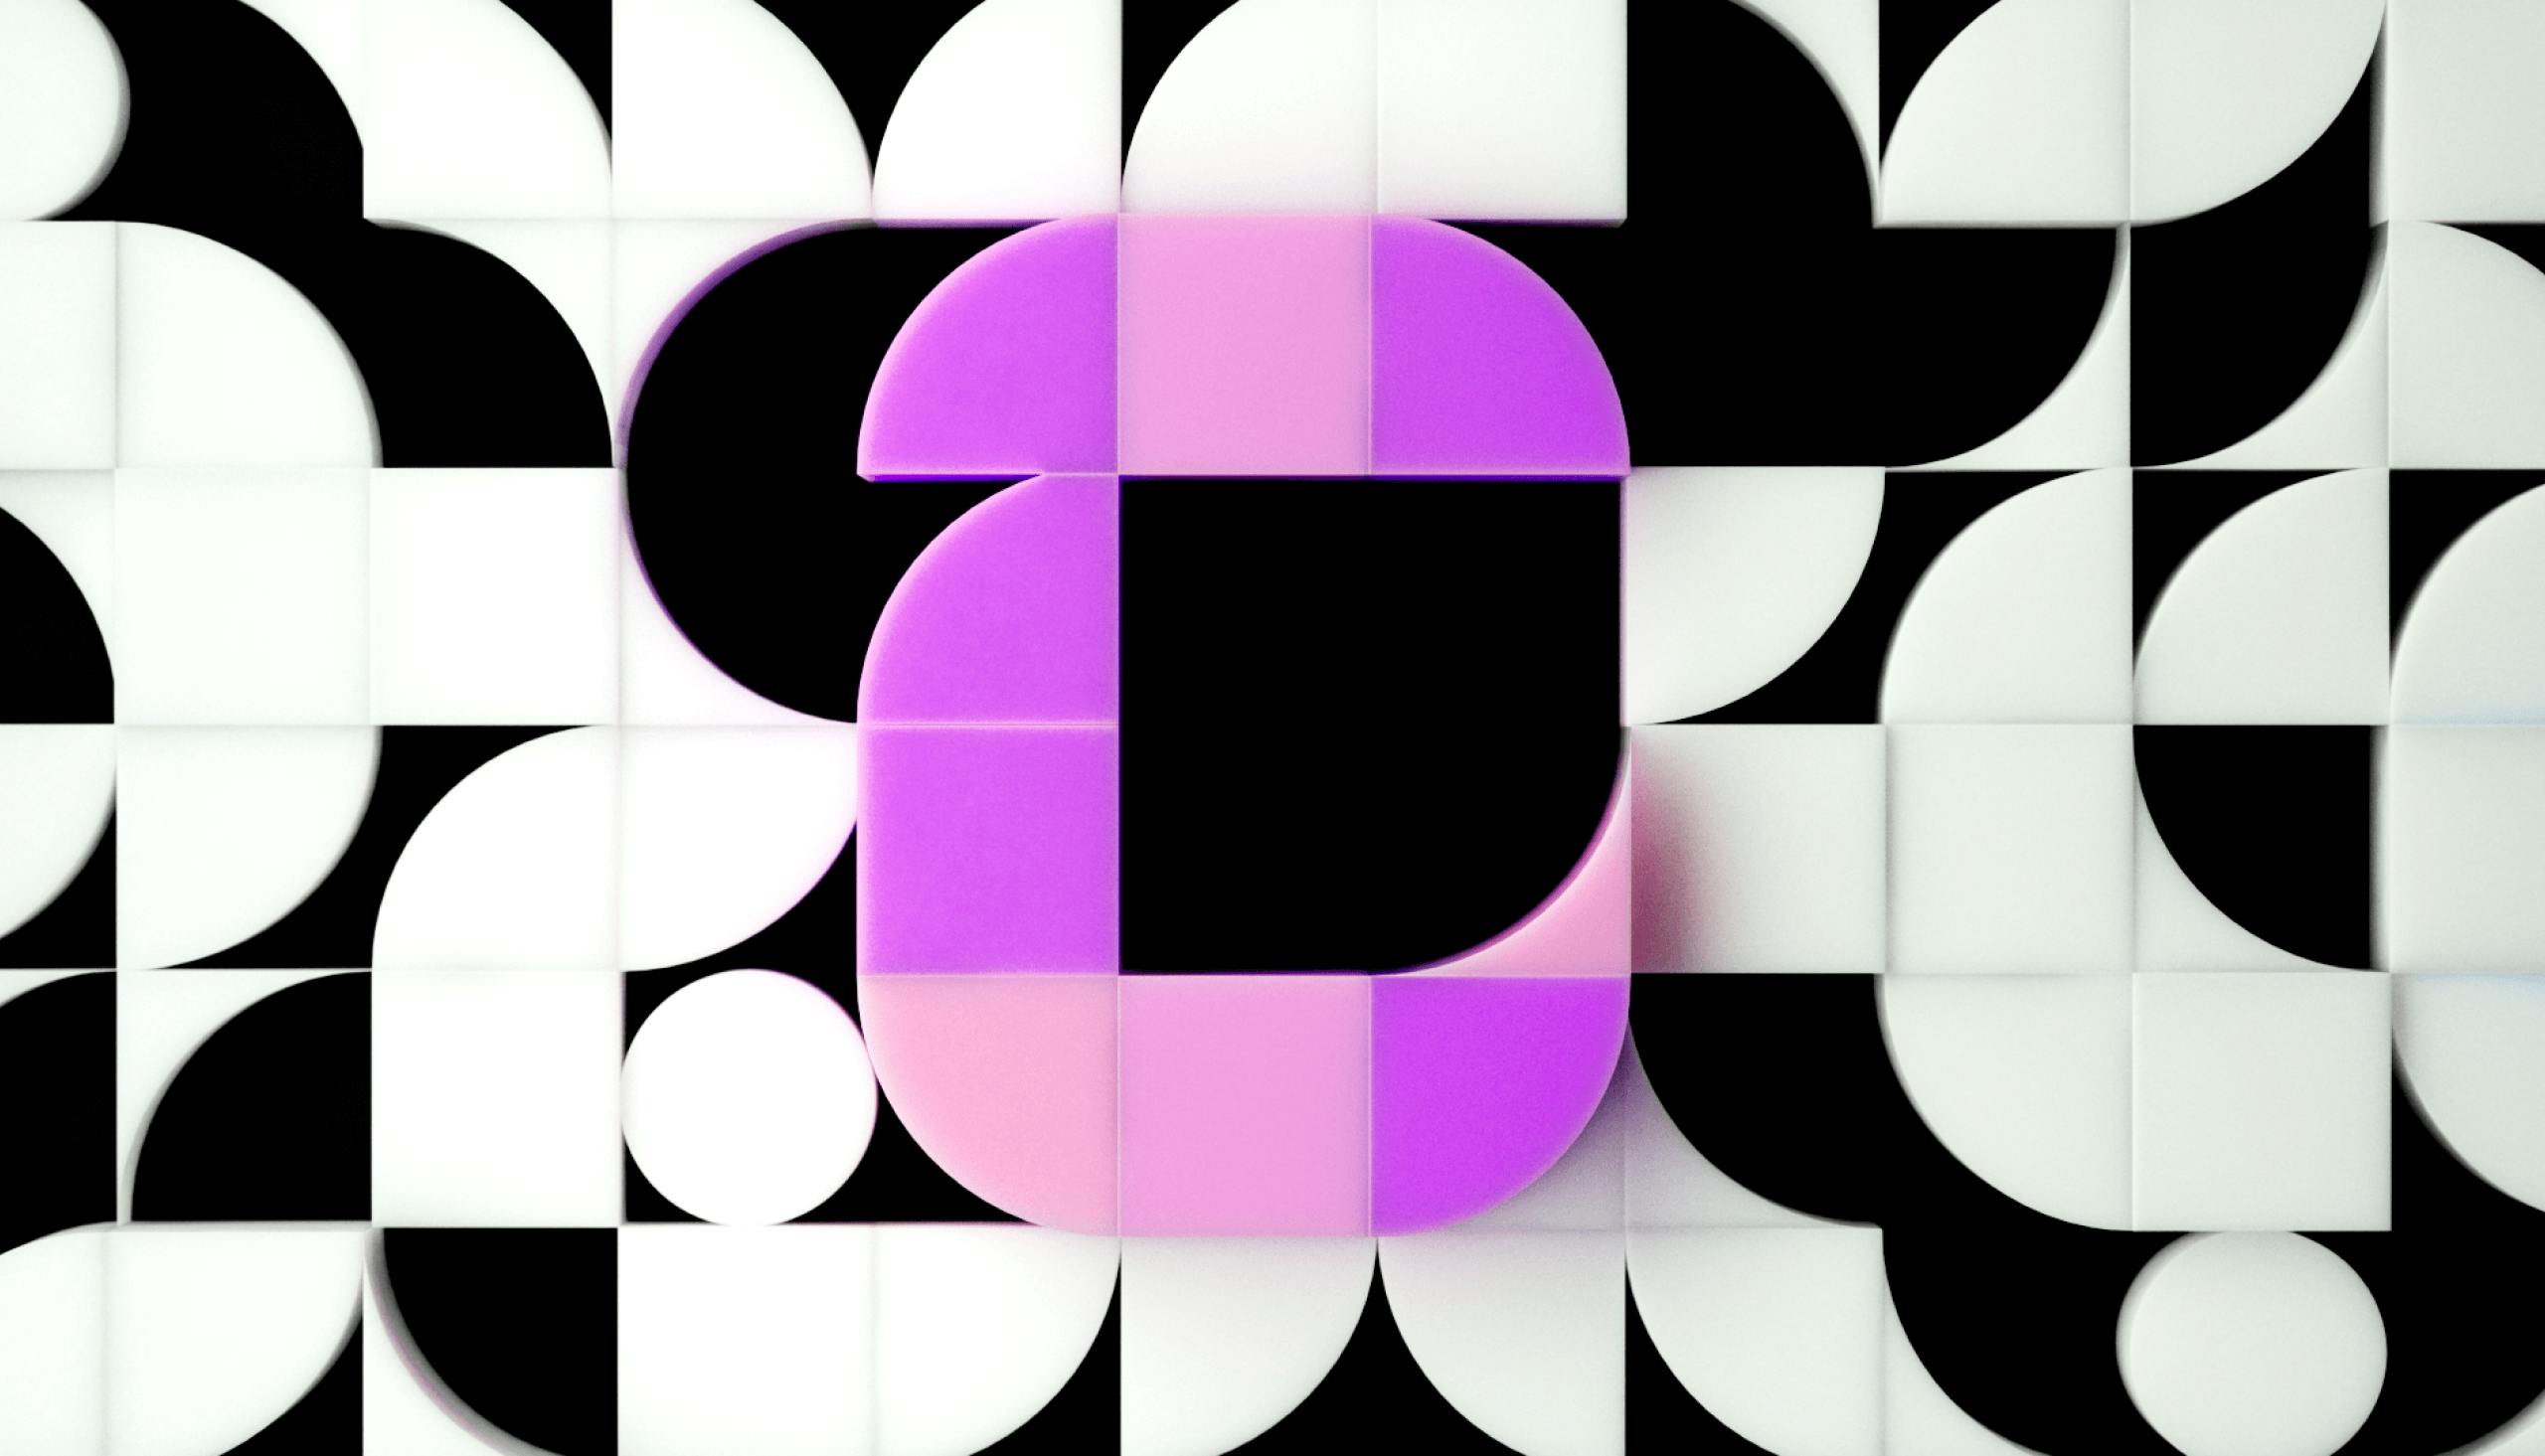 Black and white geometric background with Adobe Consonant "C" in the middle in purple.